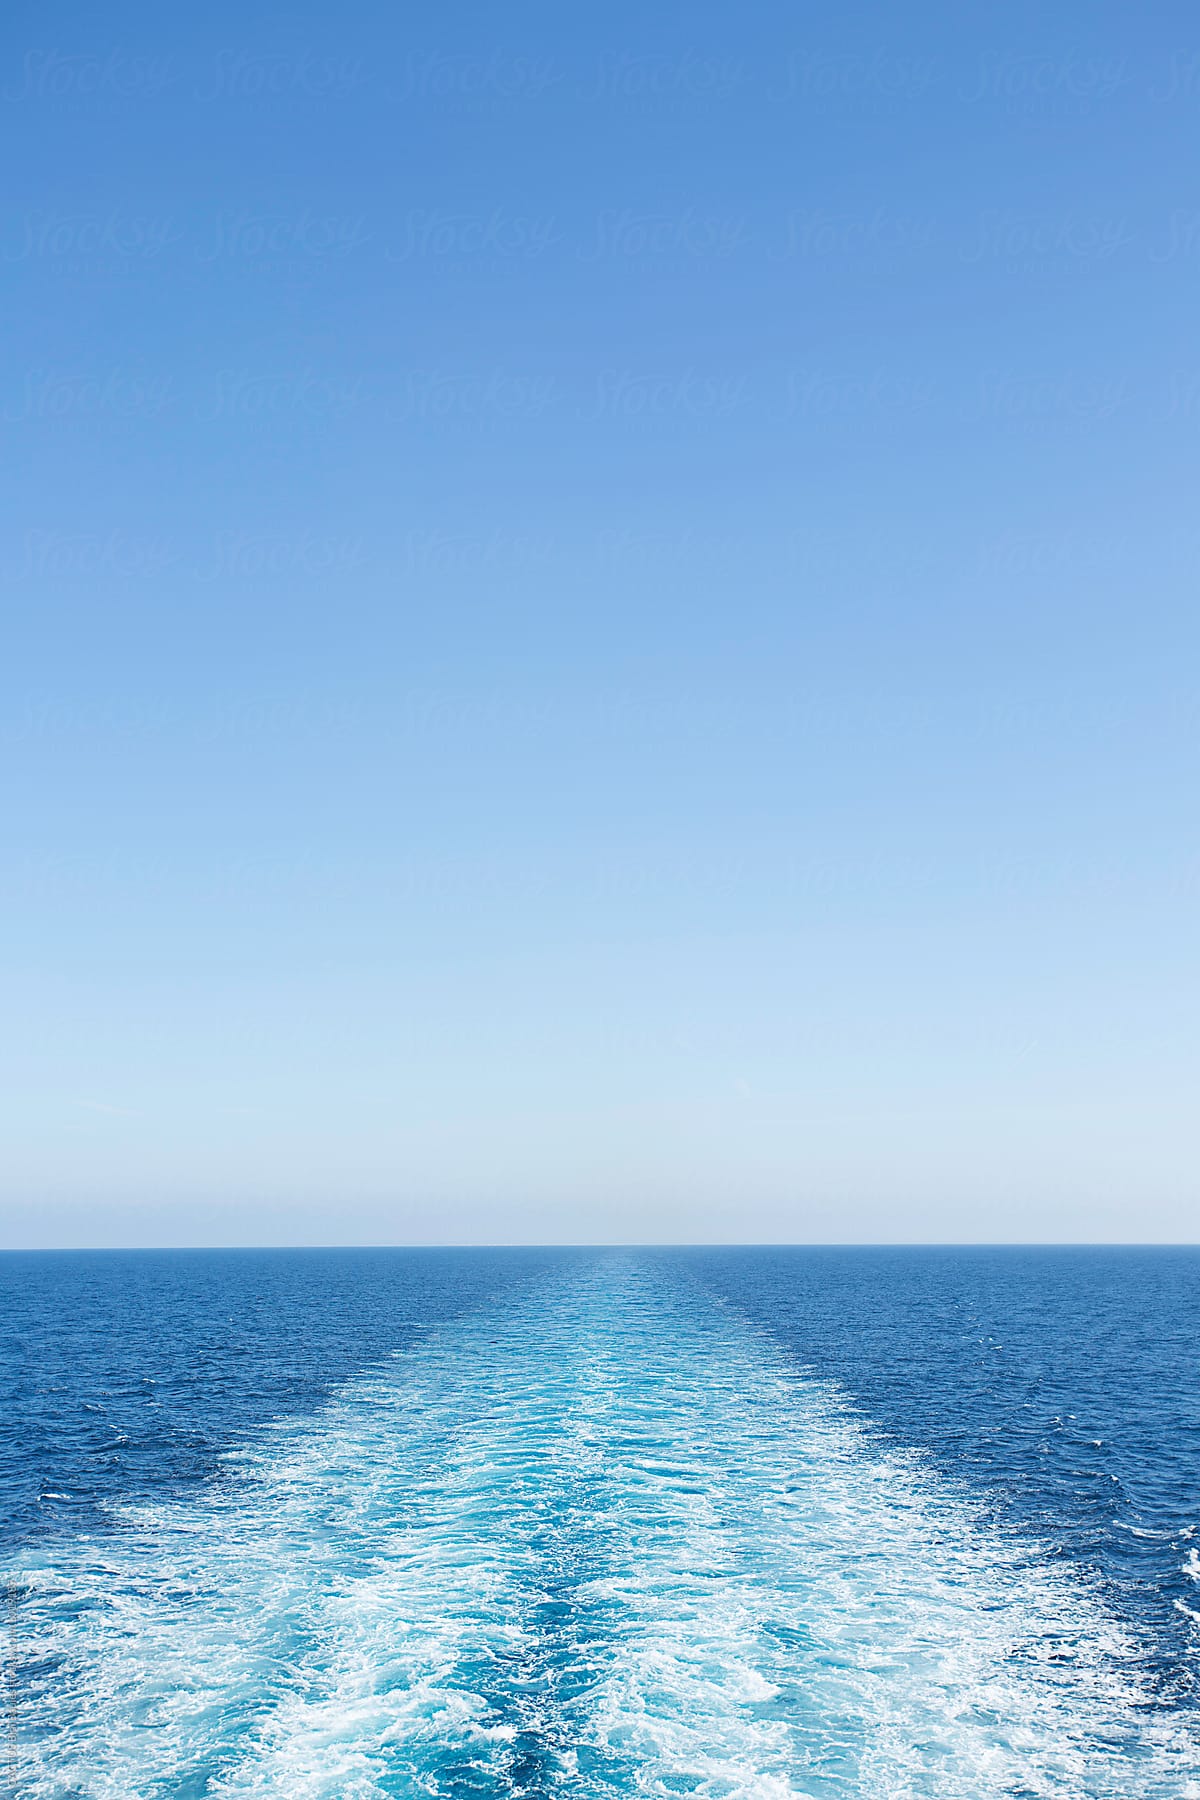 Water wake of a ferry boat in the sea